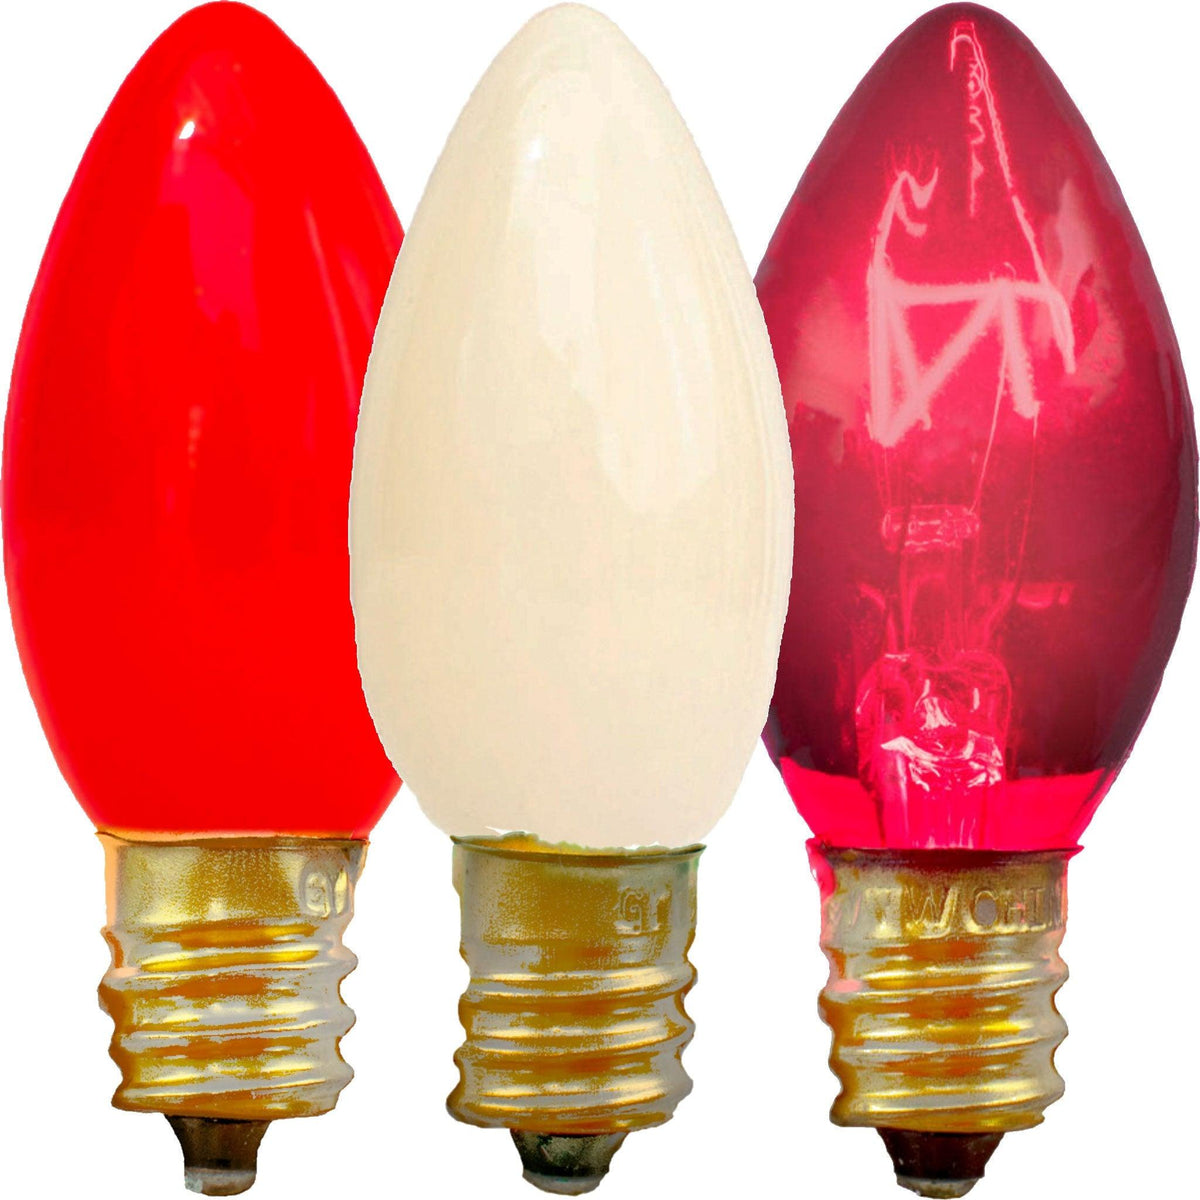 Buy a brand new box of C7/C9 Candelabra Style Valentine's Day Replacement Light Bulbs sold in the box of 25 from leedisplay.com